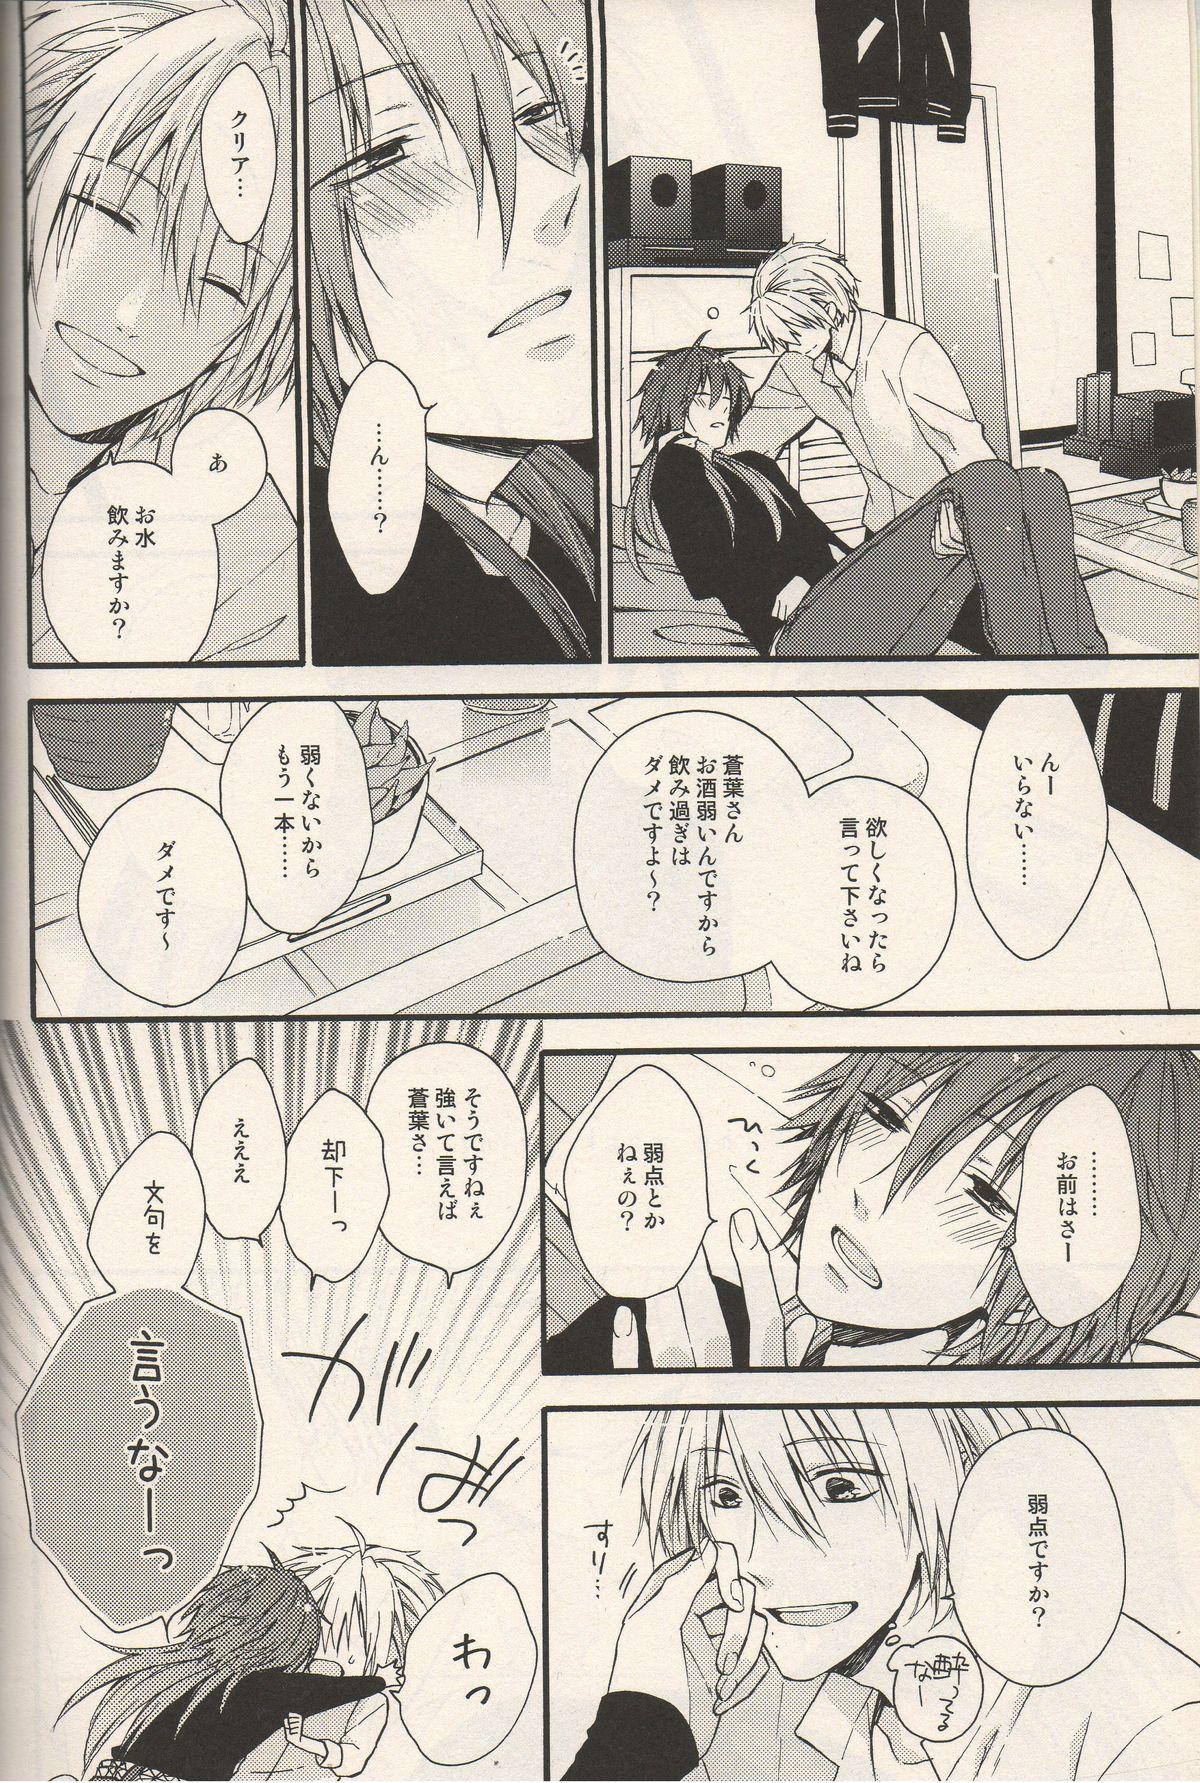 Guy The Story About You - Dramatical murder Behind - Page 6